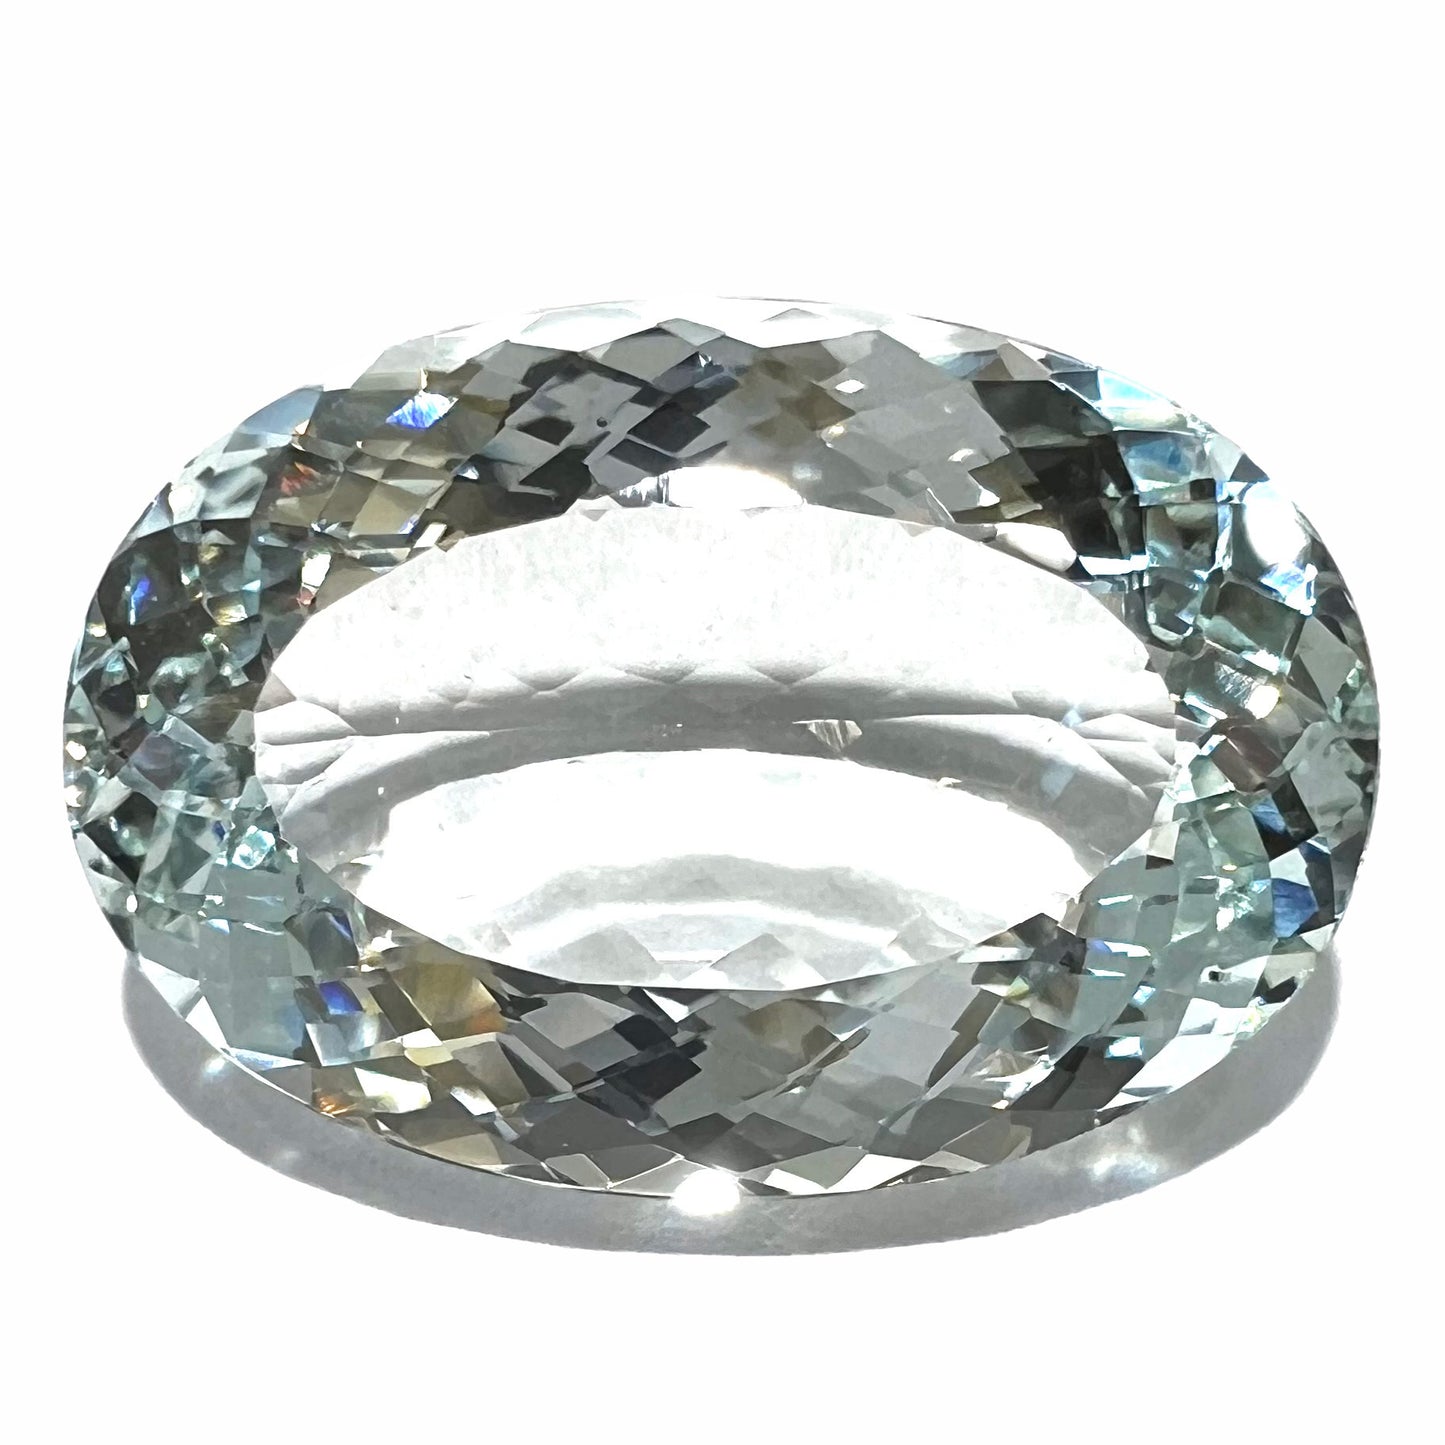 A faceted oval cut Brazilian aquamarine gemstone.  The stone is a light blue color.